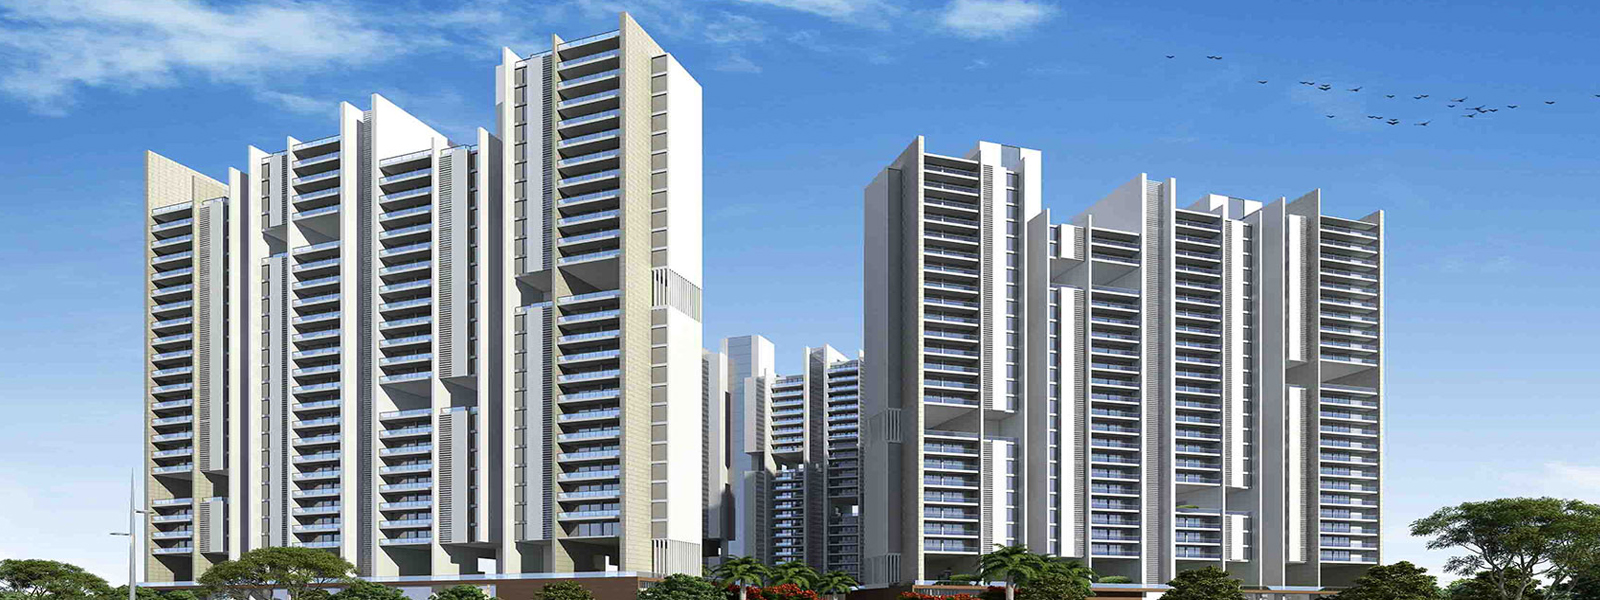 Luxury Projects in Gurgaon